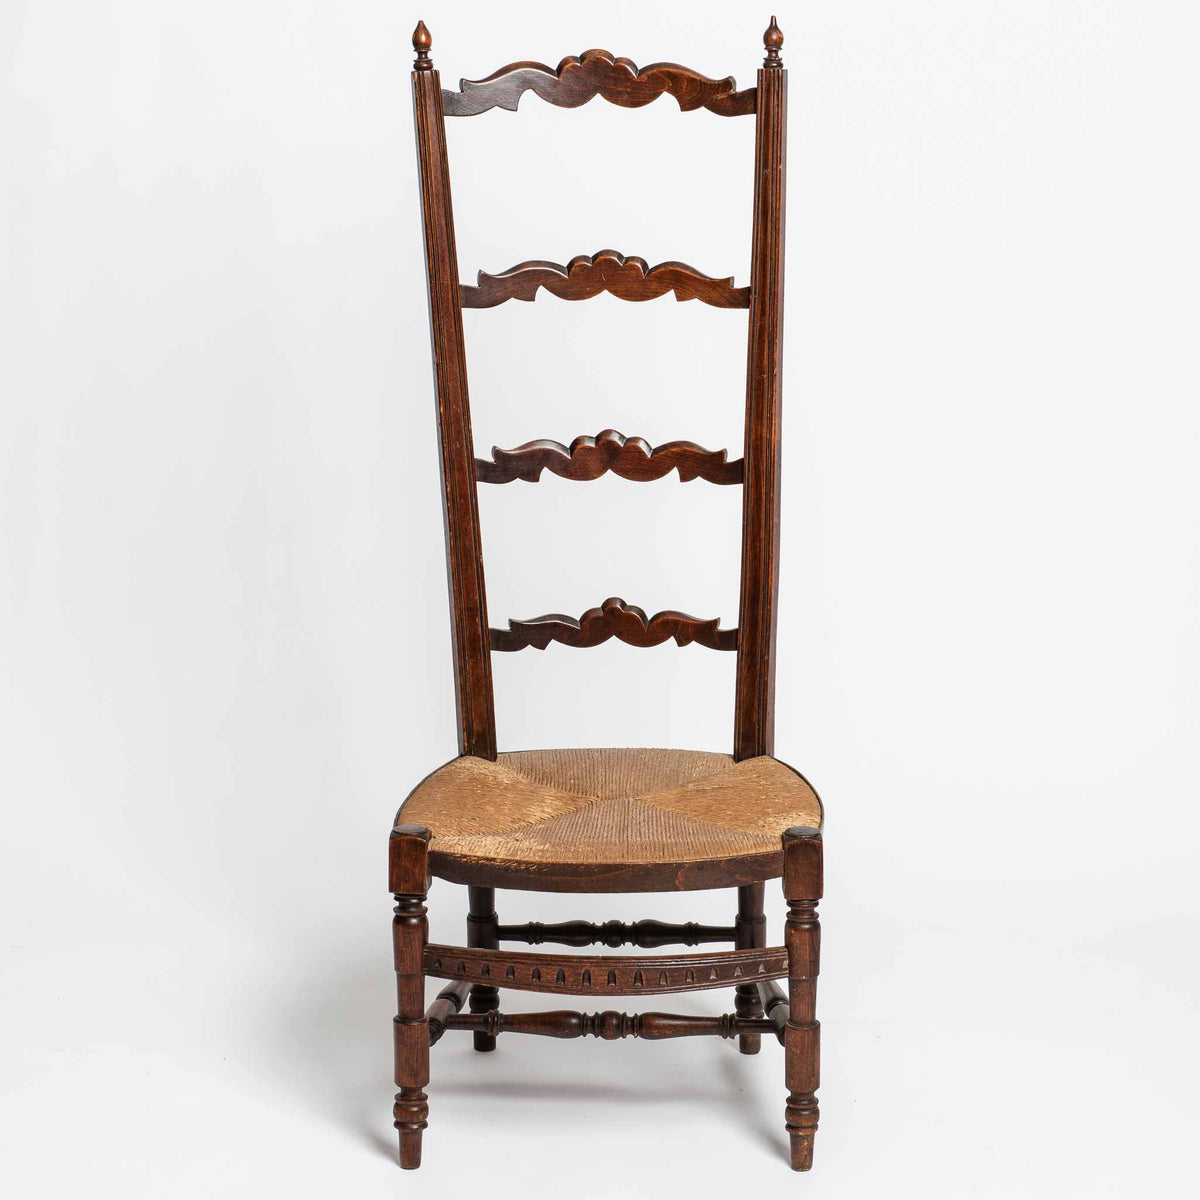 ANTIQUE HIGH LADDEBACK CHAIR with RUSH SEAT